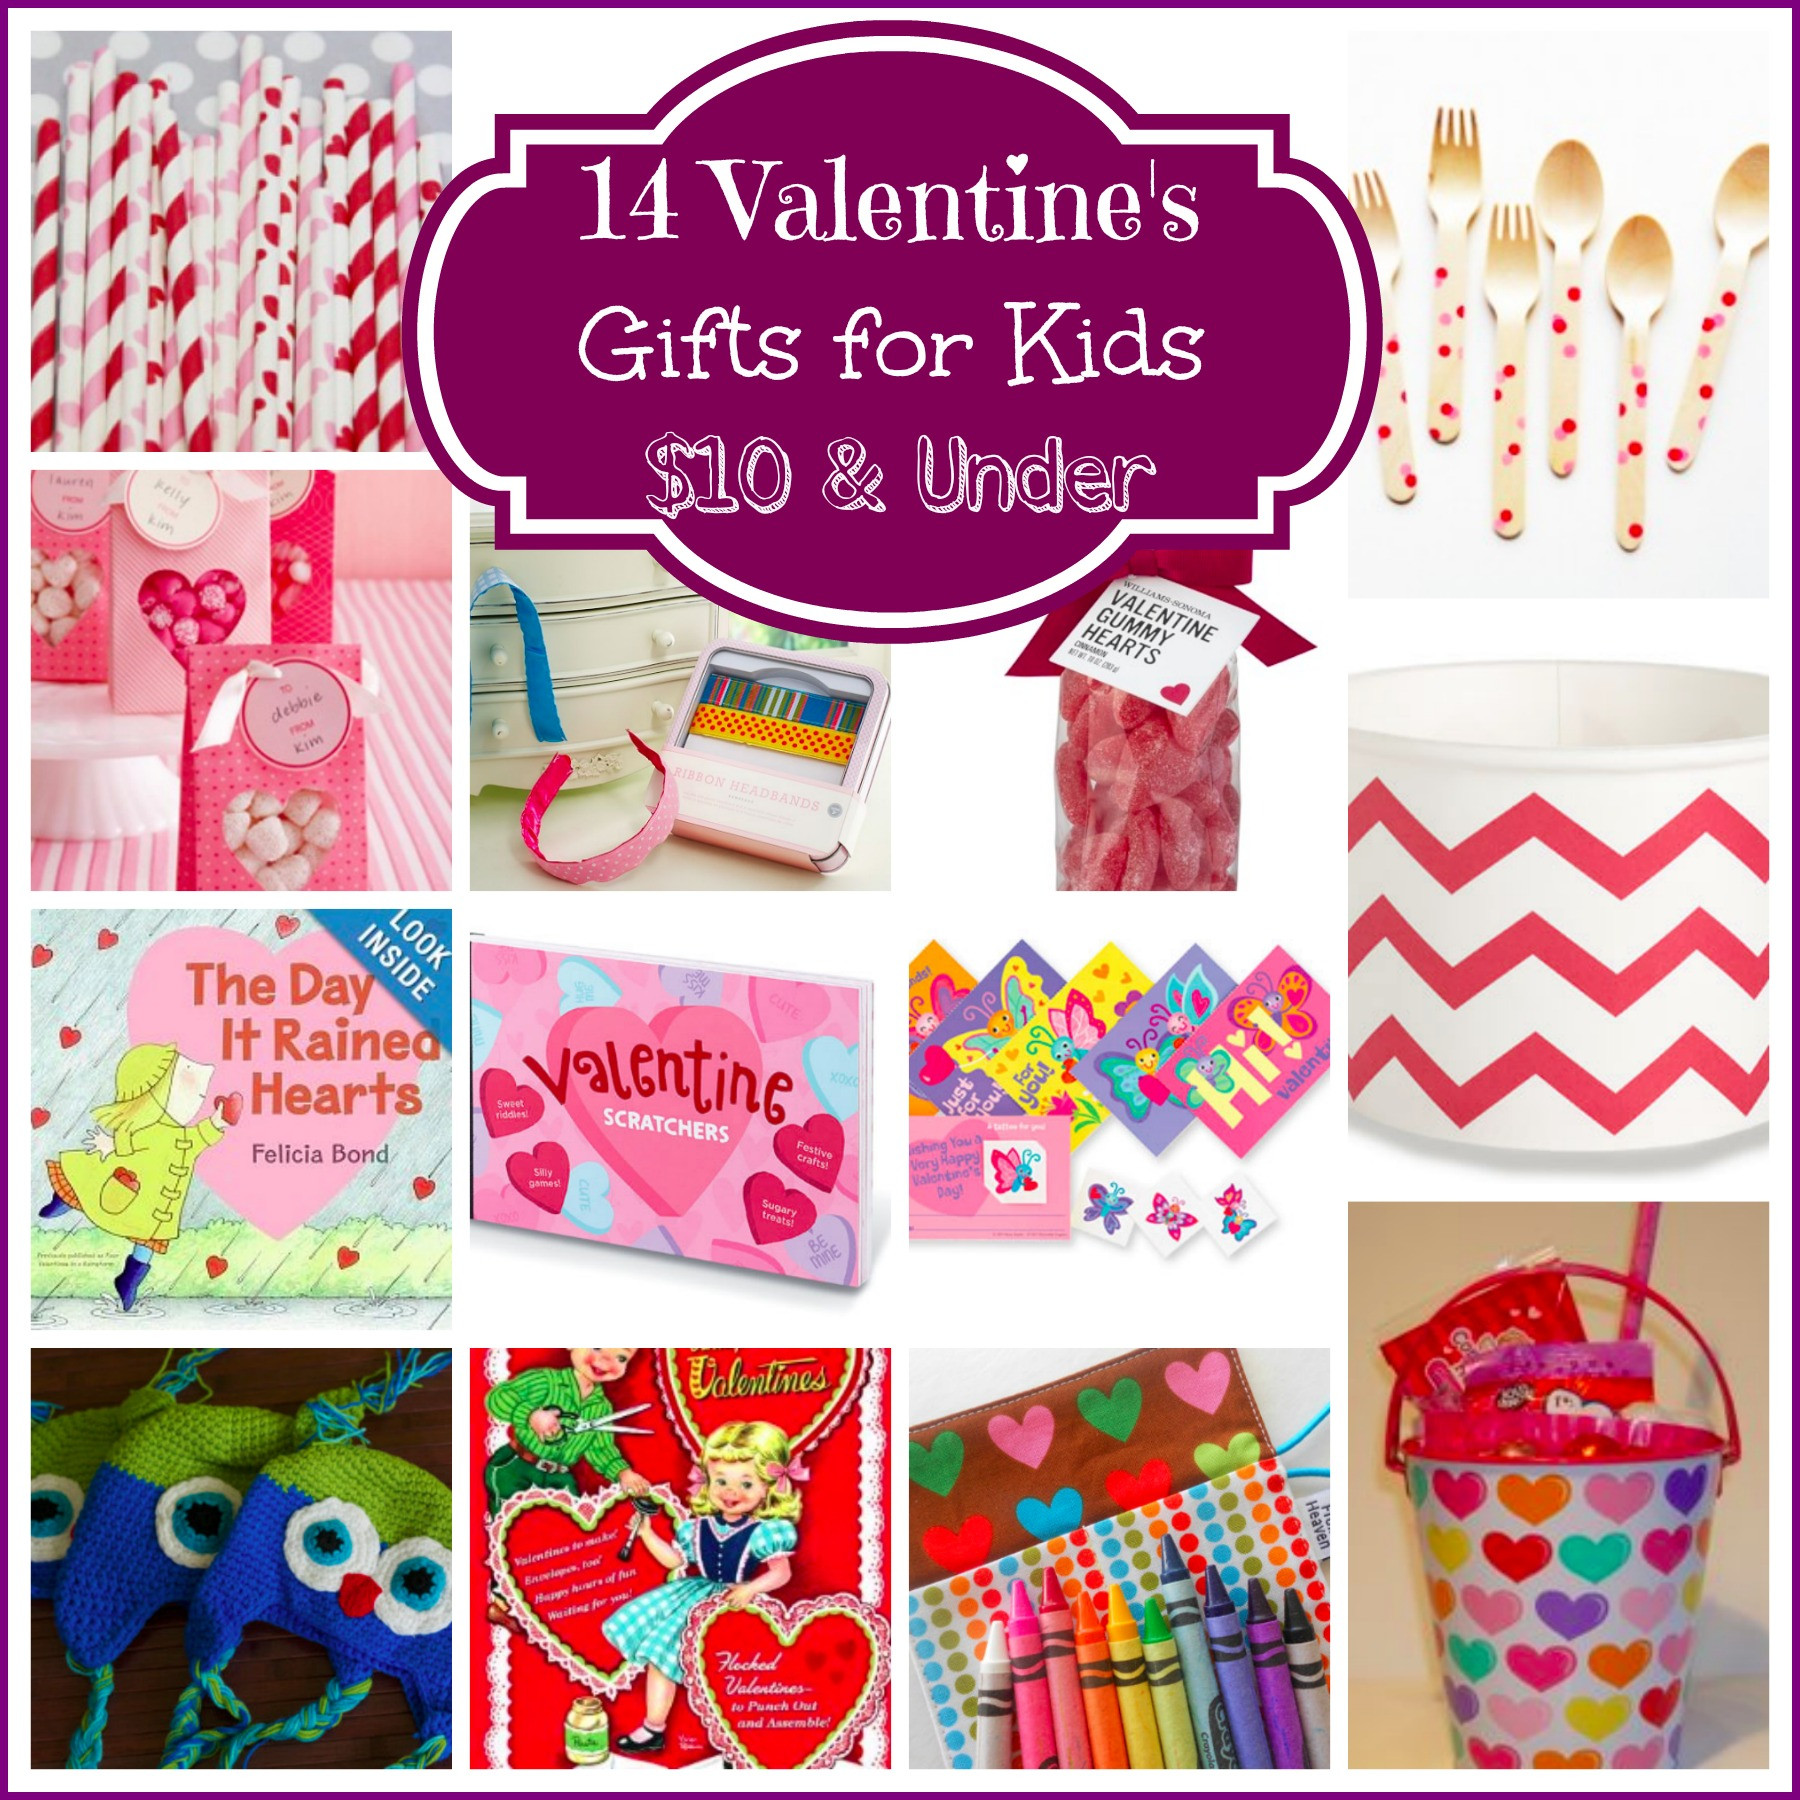 Valentines Gifts From Kids
 14 Valentine’s Day Gifts for Kids $10 & Under